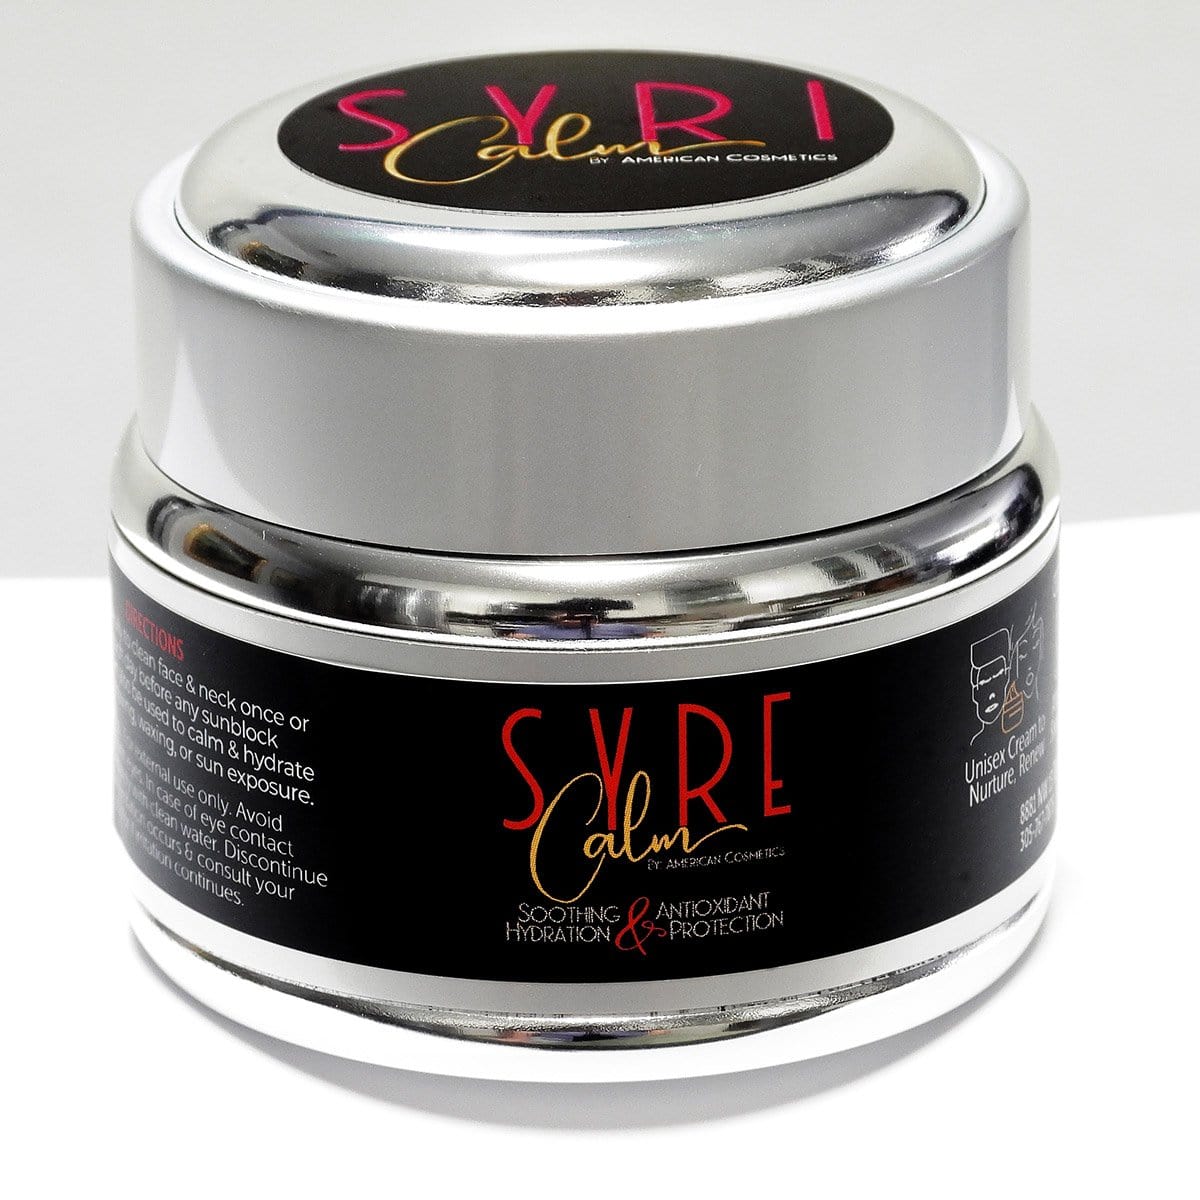 "SYRE-CALM" A Super Unisex Hydrator Ultimate Cream for Stressed, or Sensitive Skin - After Shave, Sun Exposure or Waxing, or just Everyday Hydration